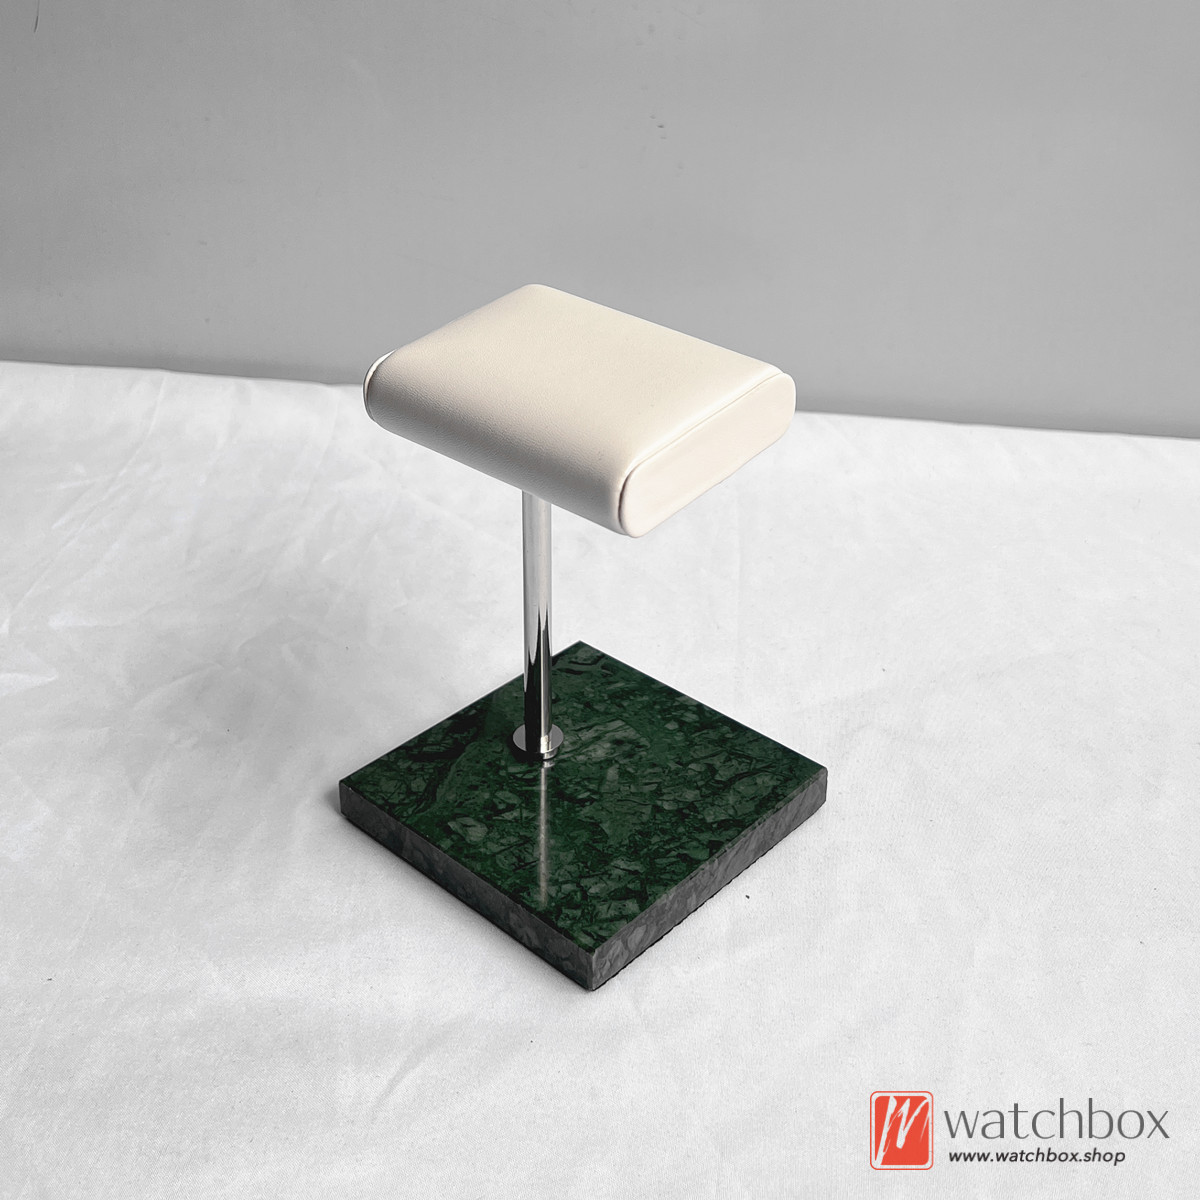 The Green Square Marble Base PU Leather Watch Jewelry Case Holder Counter Display Stand